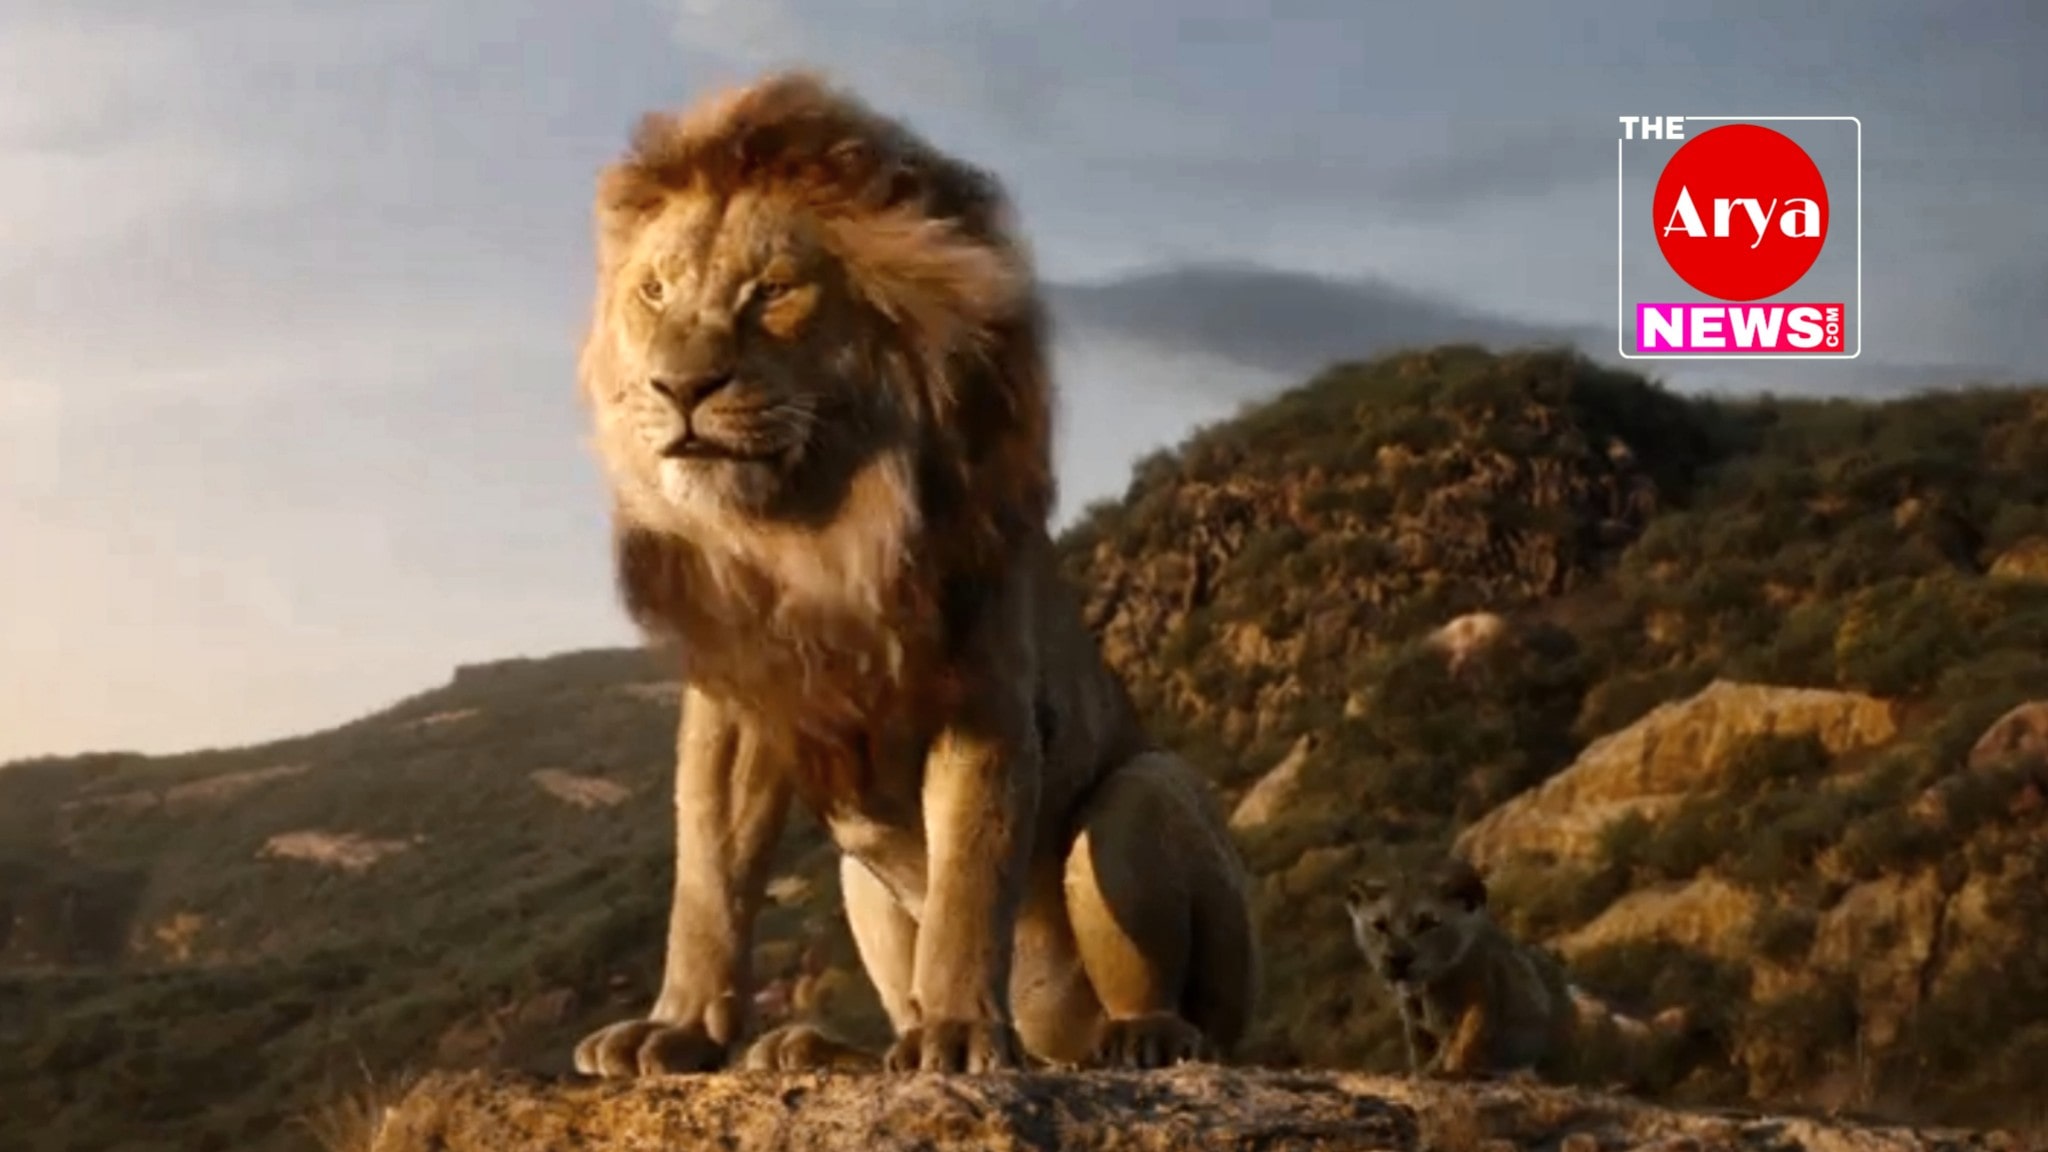 the lion king full movie in Hindi download t torant